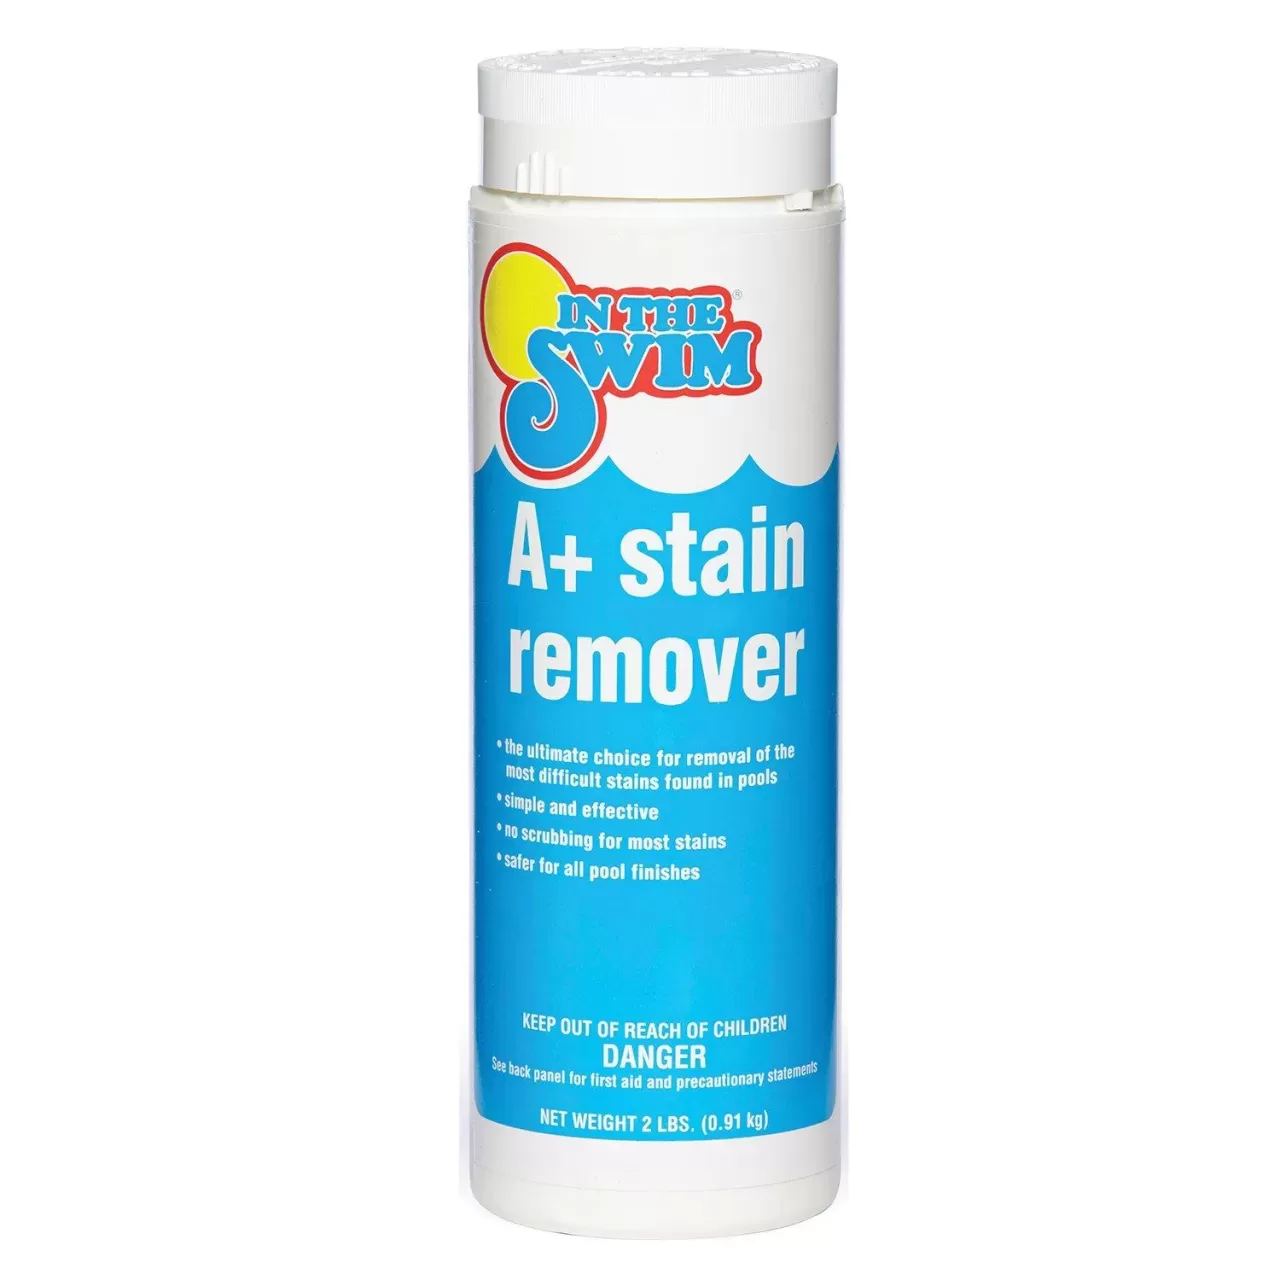 RX Clear Ultra Mineral Remover | 1 Qt. Bottle | 4-Pack